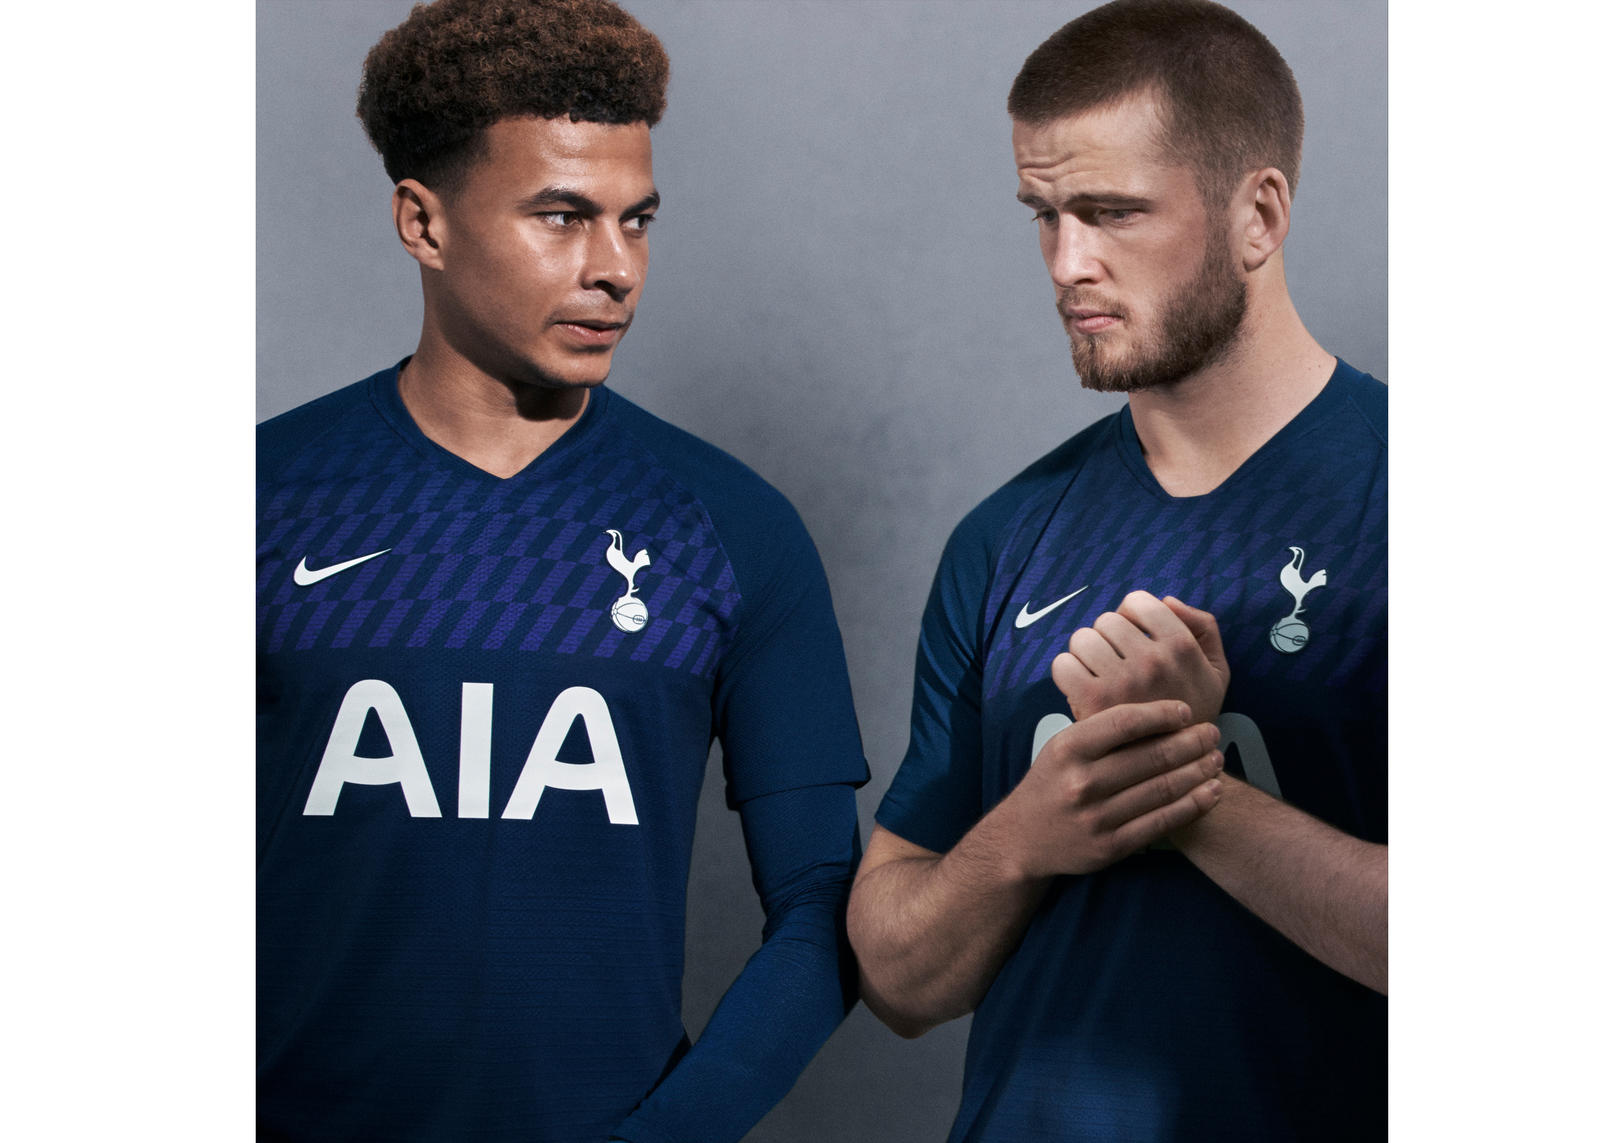 Tottenham's 2019-20 away kits just leaked, and they're pretty